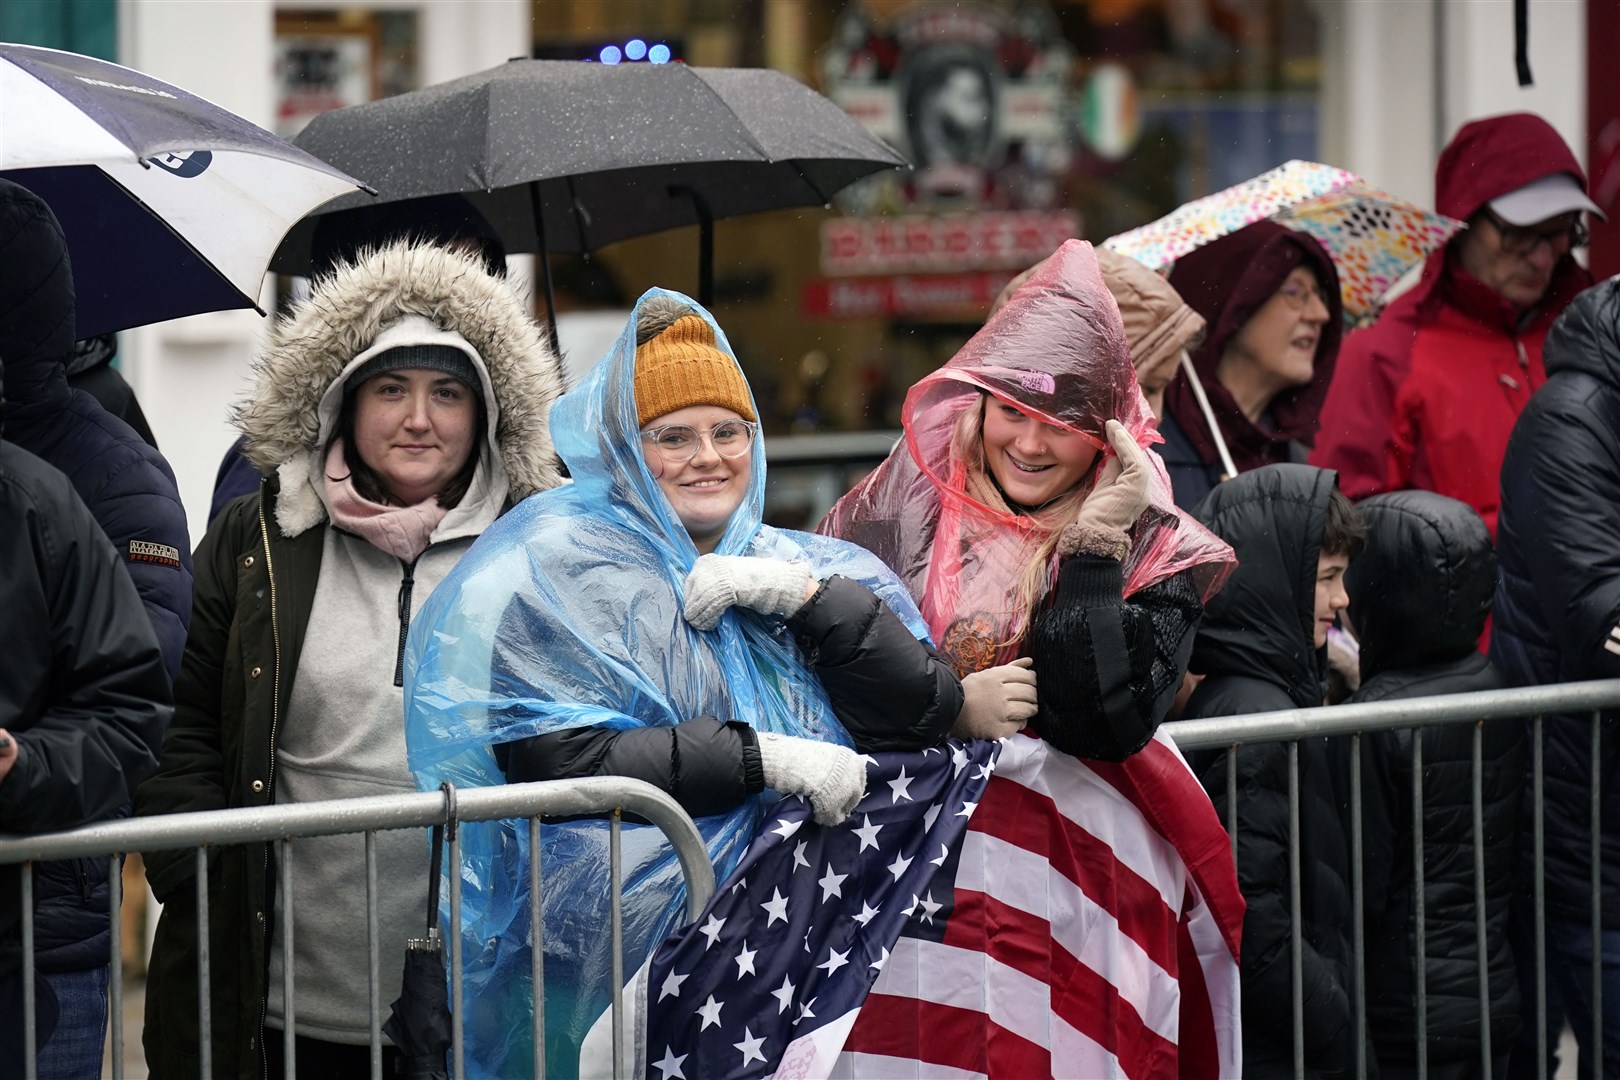 People awaiting the arrival of the US president in Dundalk (Niall Carson/PA)